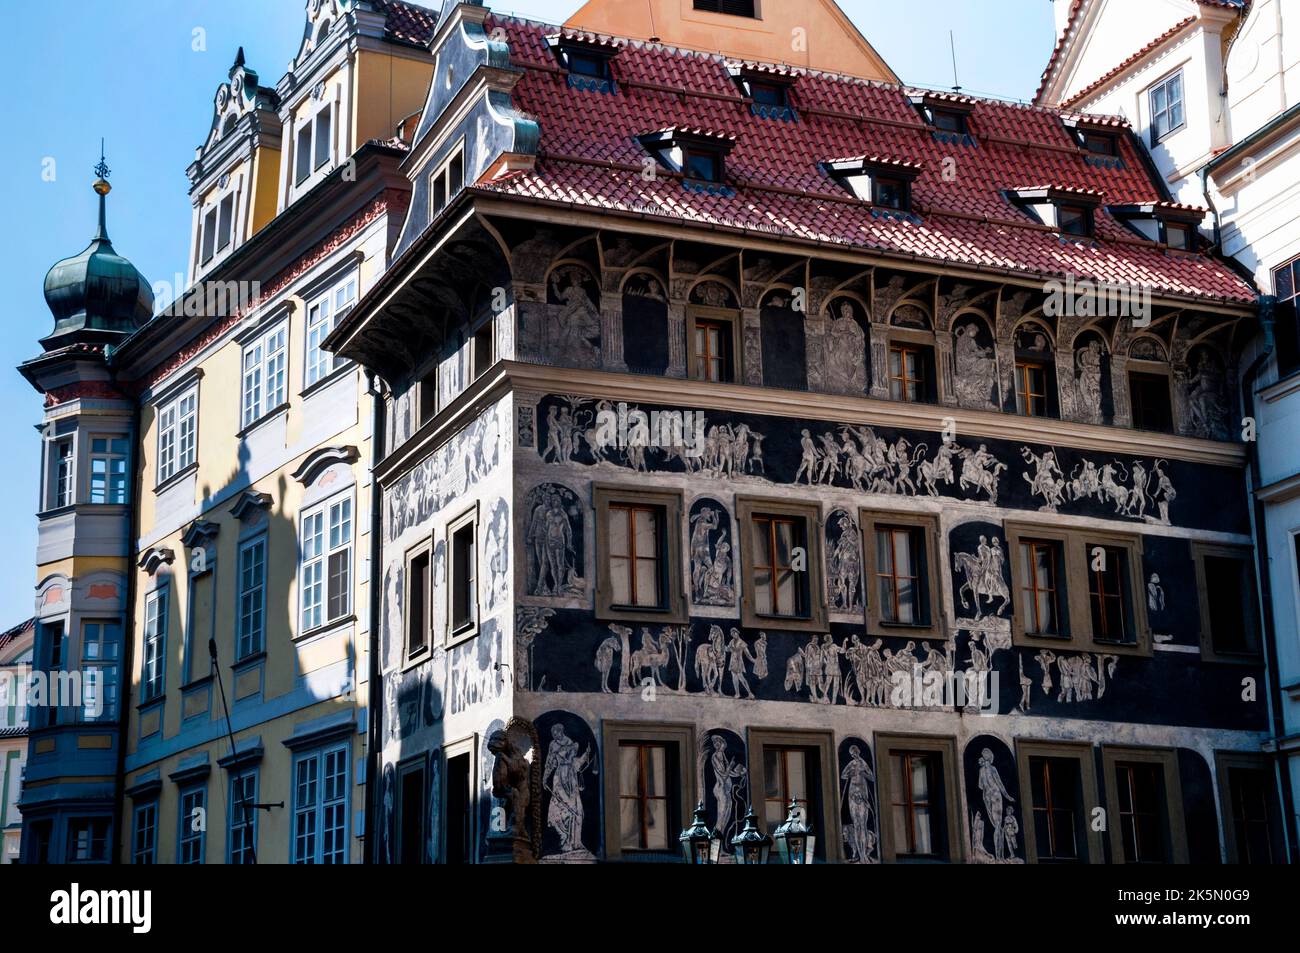 The House at the Minute in Old Town Square, Prague, Czech Republic covered in sgraffito painting. Stock Photo